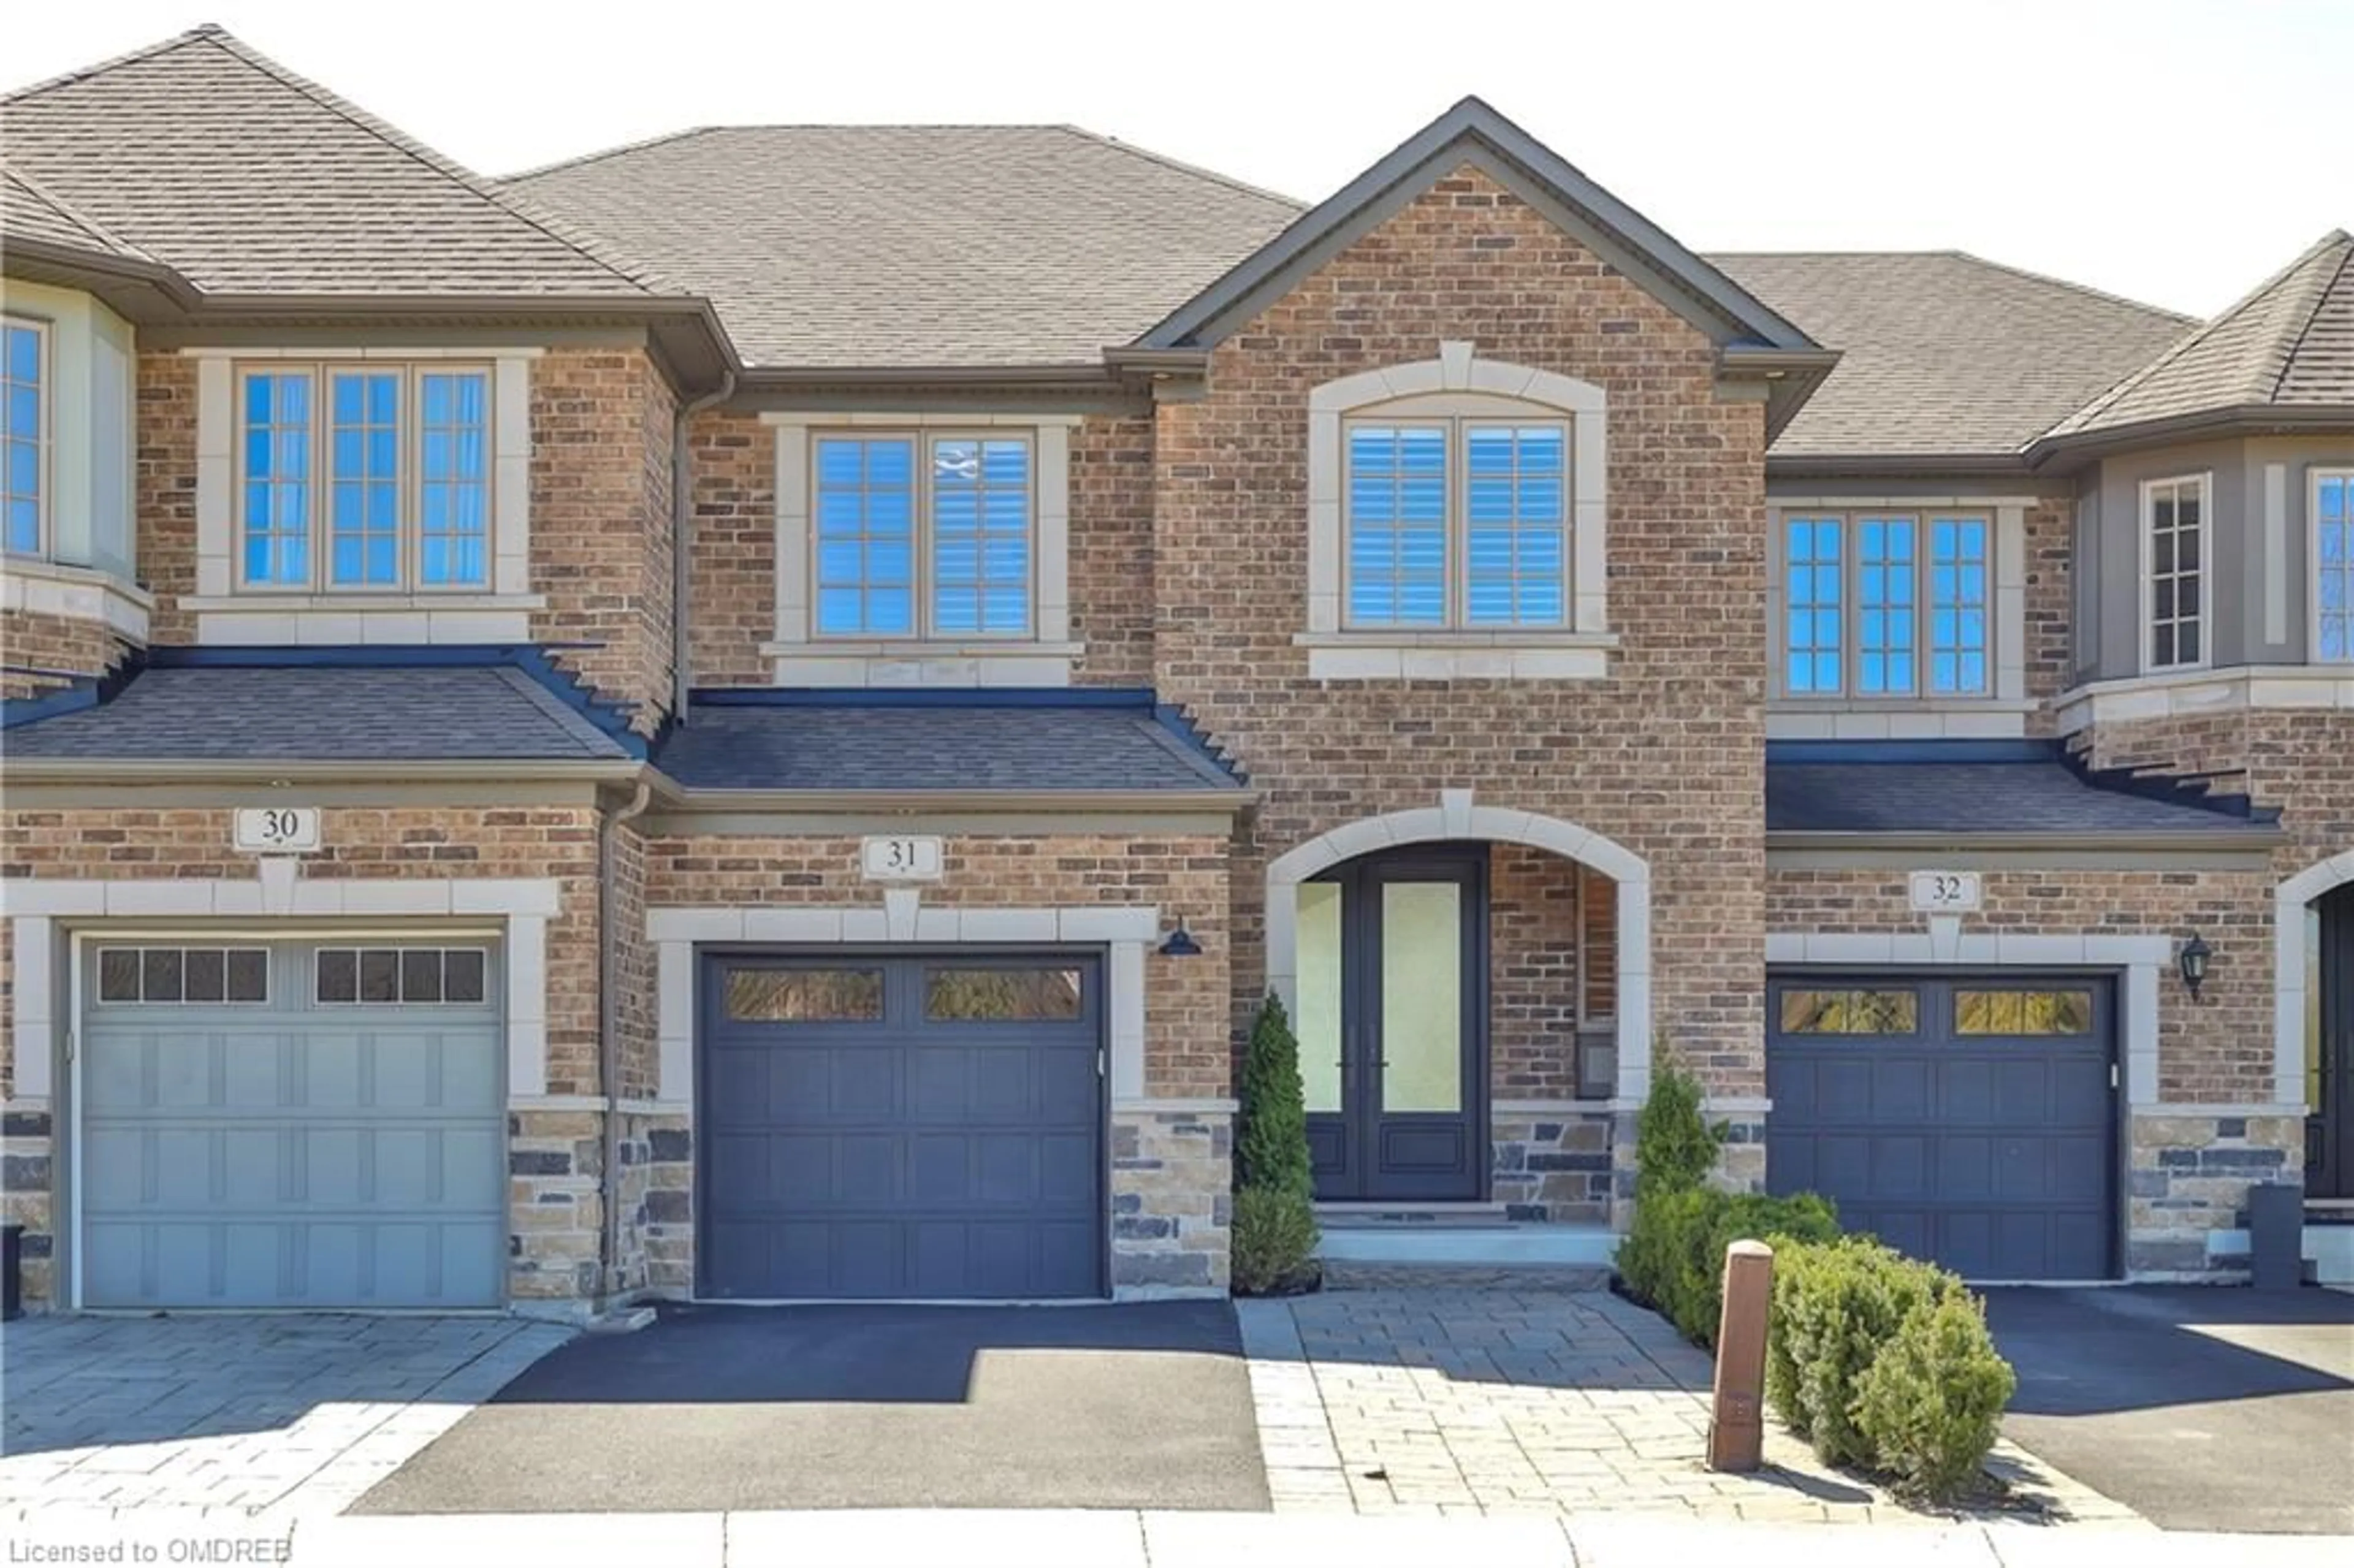 Home with brick exterior material for 3353 Liptay Ave #31, Oakville Ontario L6M 0M6